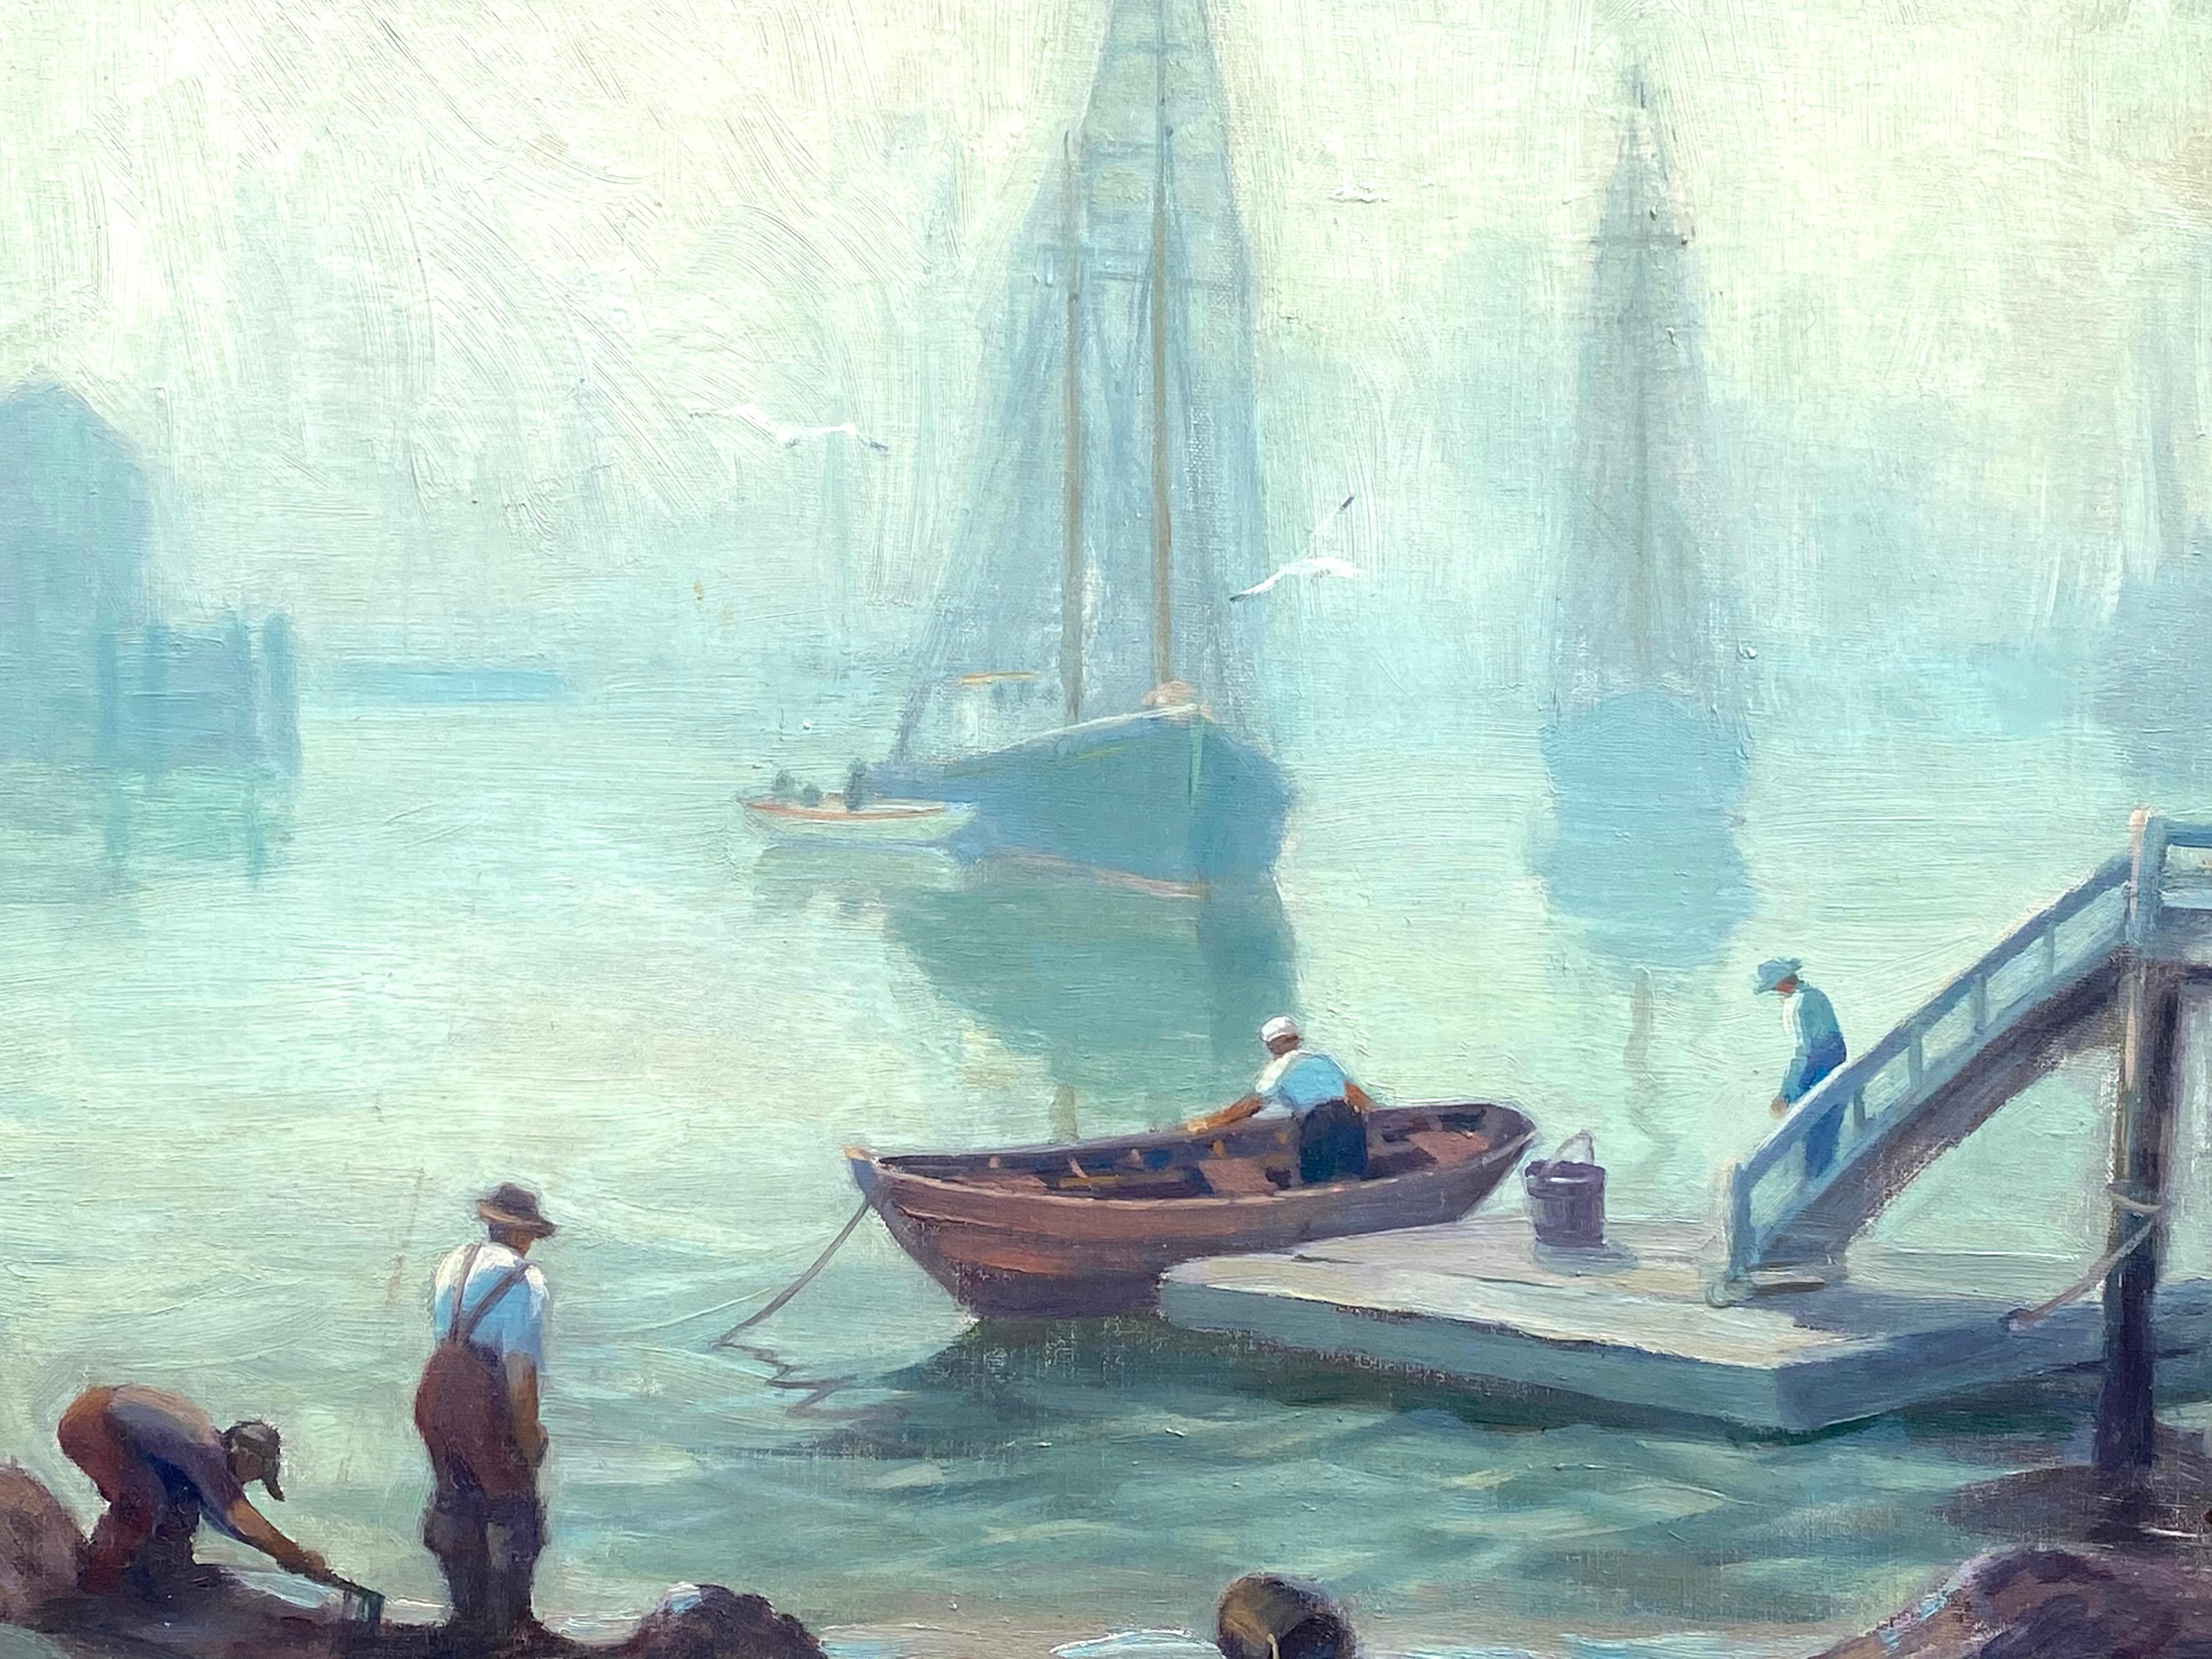 Oil on artist board painting of a misty morning in Gloucester Harbor by the Provincetown artist, Kay Kellogg. Signé en bas à gauche. Circa 1935. The painting depicts fishermen beginning their day at the Gloucester Harbor docks.  The painting is